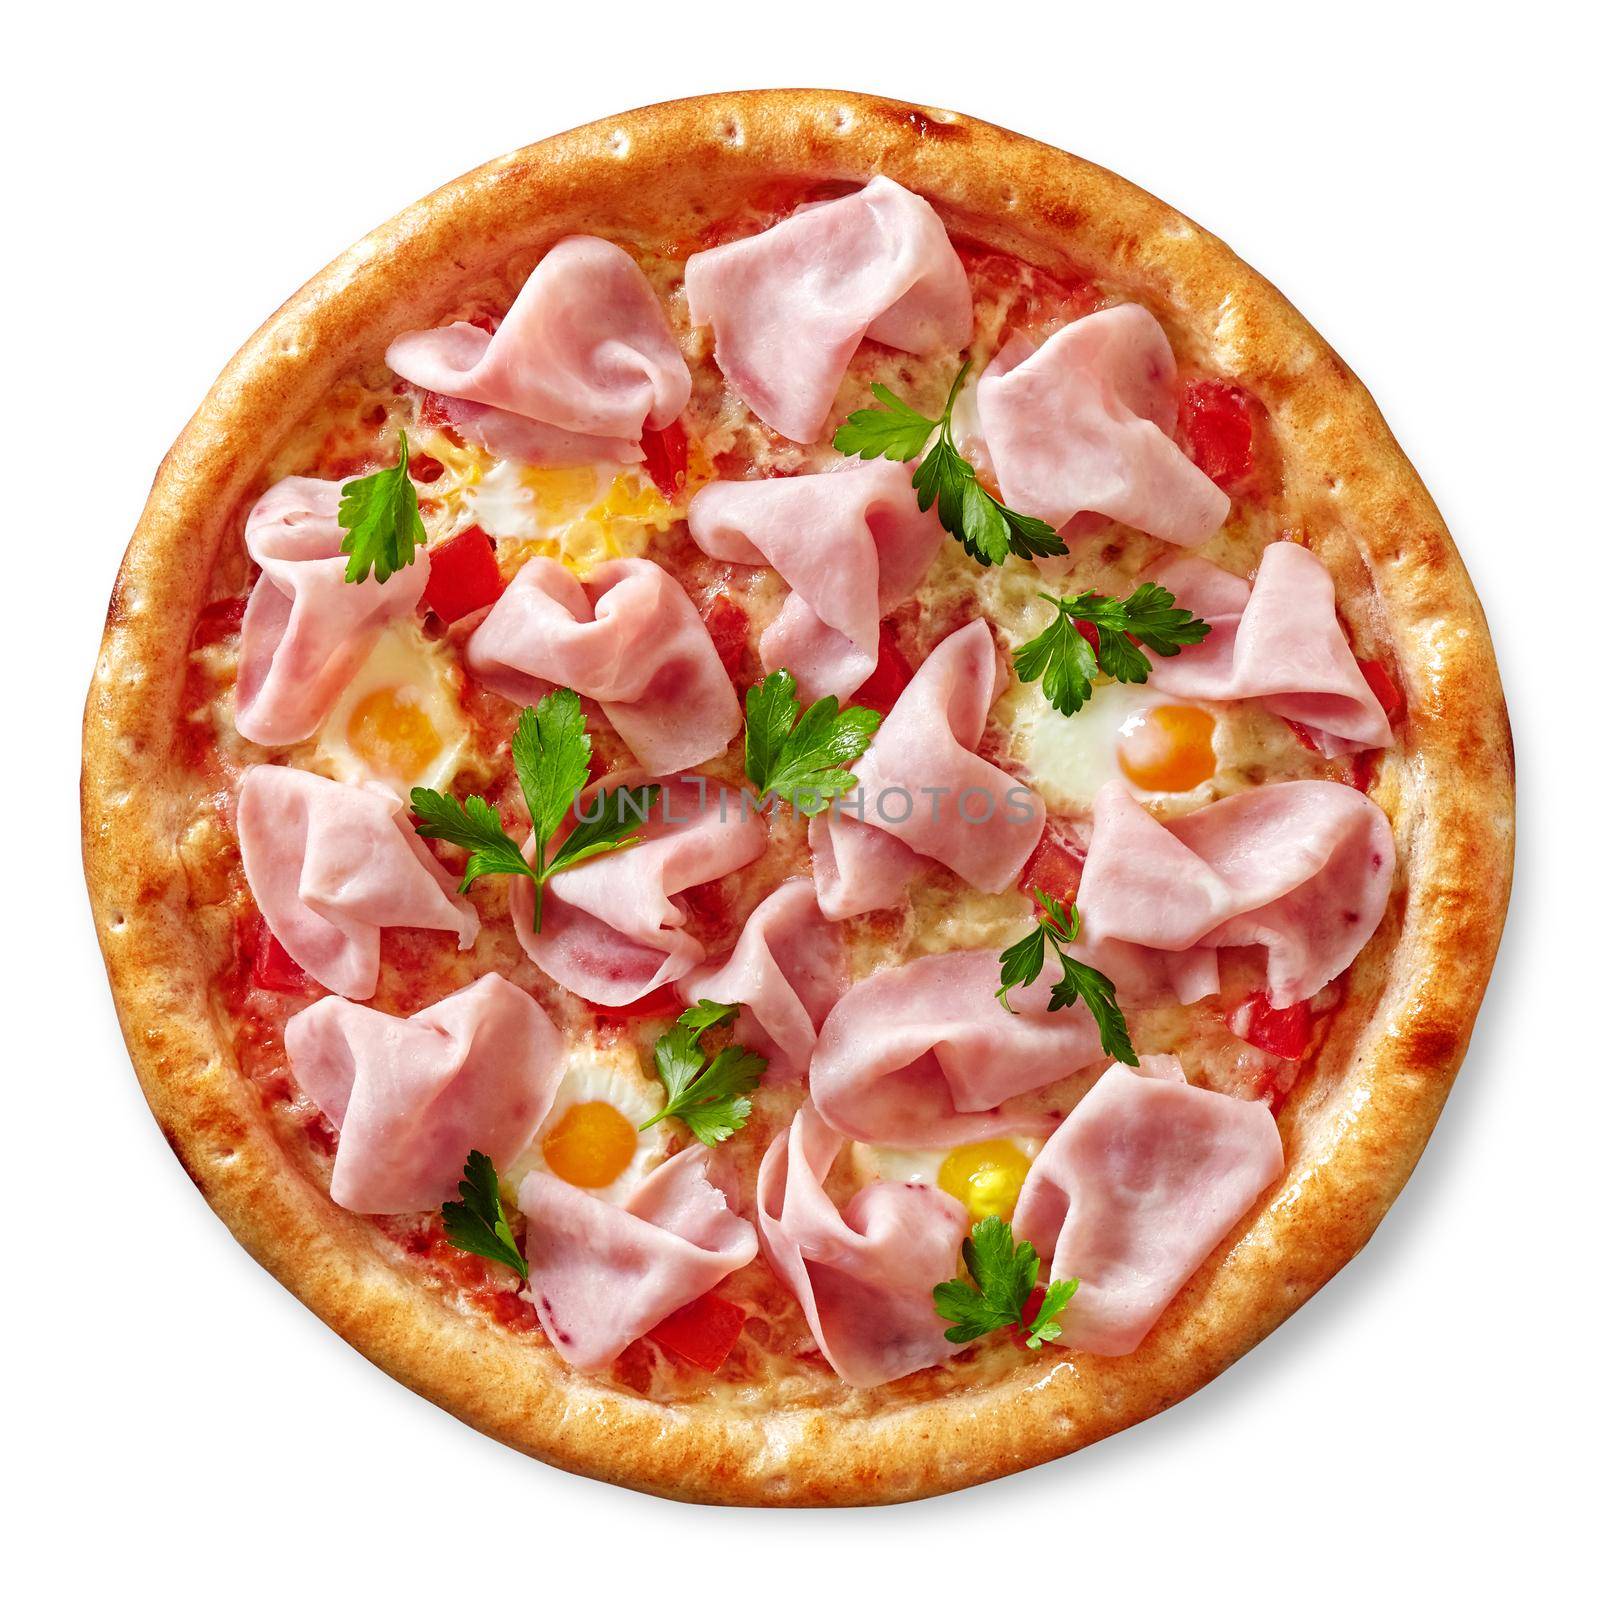 Delicious tender pizza with finely sliced ham, quail eggs and tomatoes on pelati sauce base with melted mozzarella cheese and fresh herbs isolated on white background, top view. Italian dish